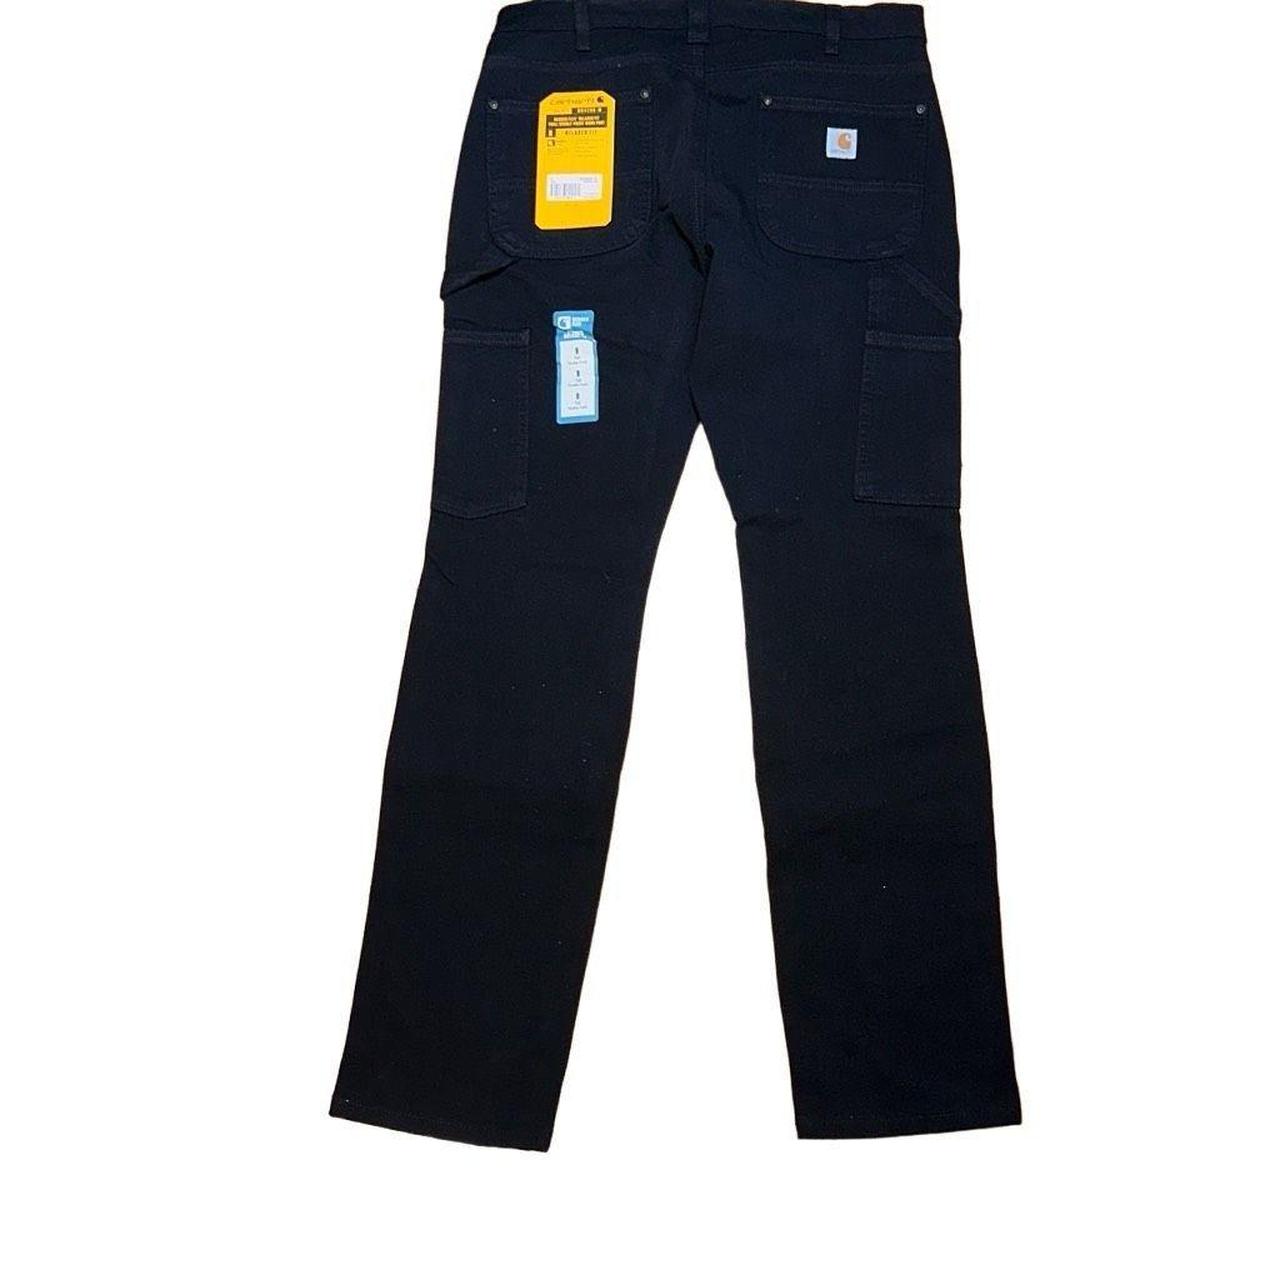 Rugged Flex® Relaxed Fit Twill Double-Front Work Pant